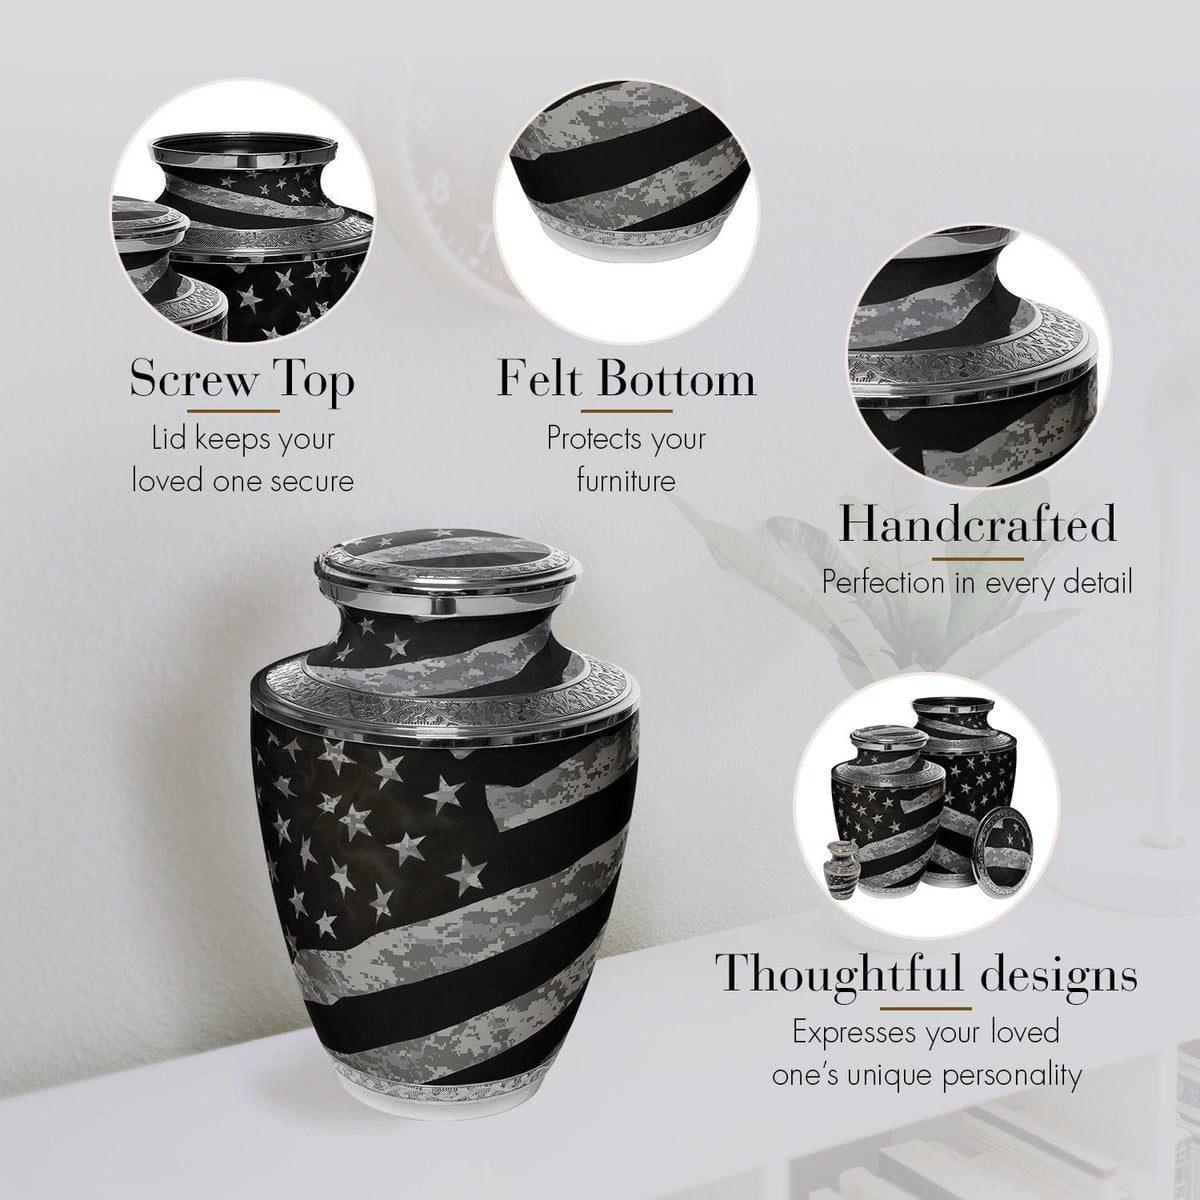 Commemorative Cremation Urns Home &amp; Garden Army UCP Flag Military Cremation Urn